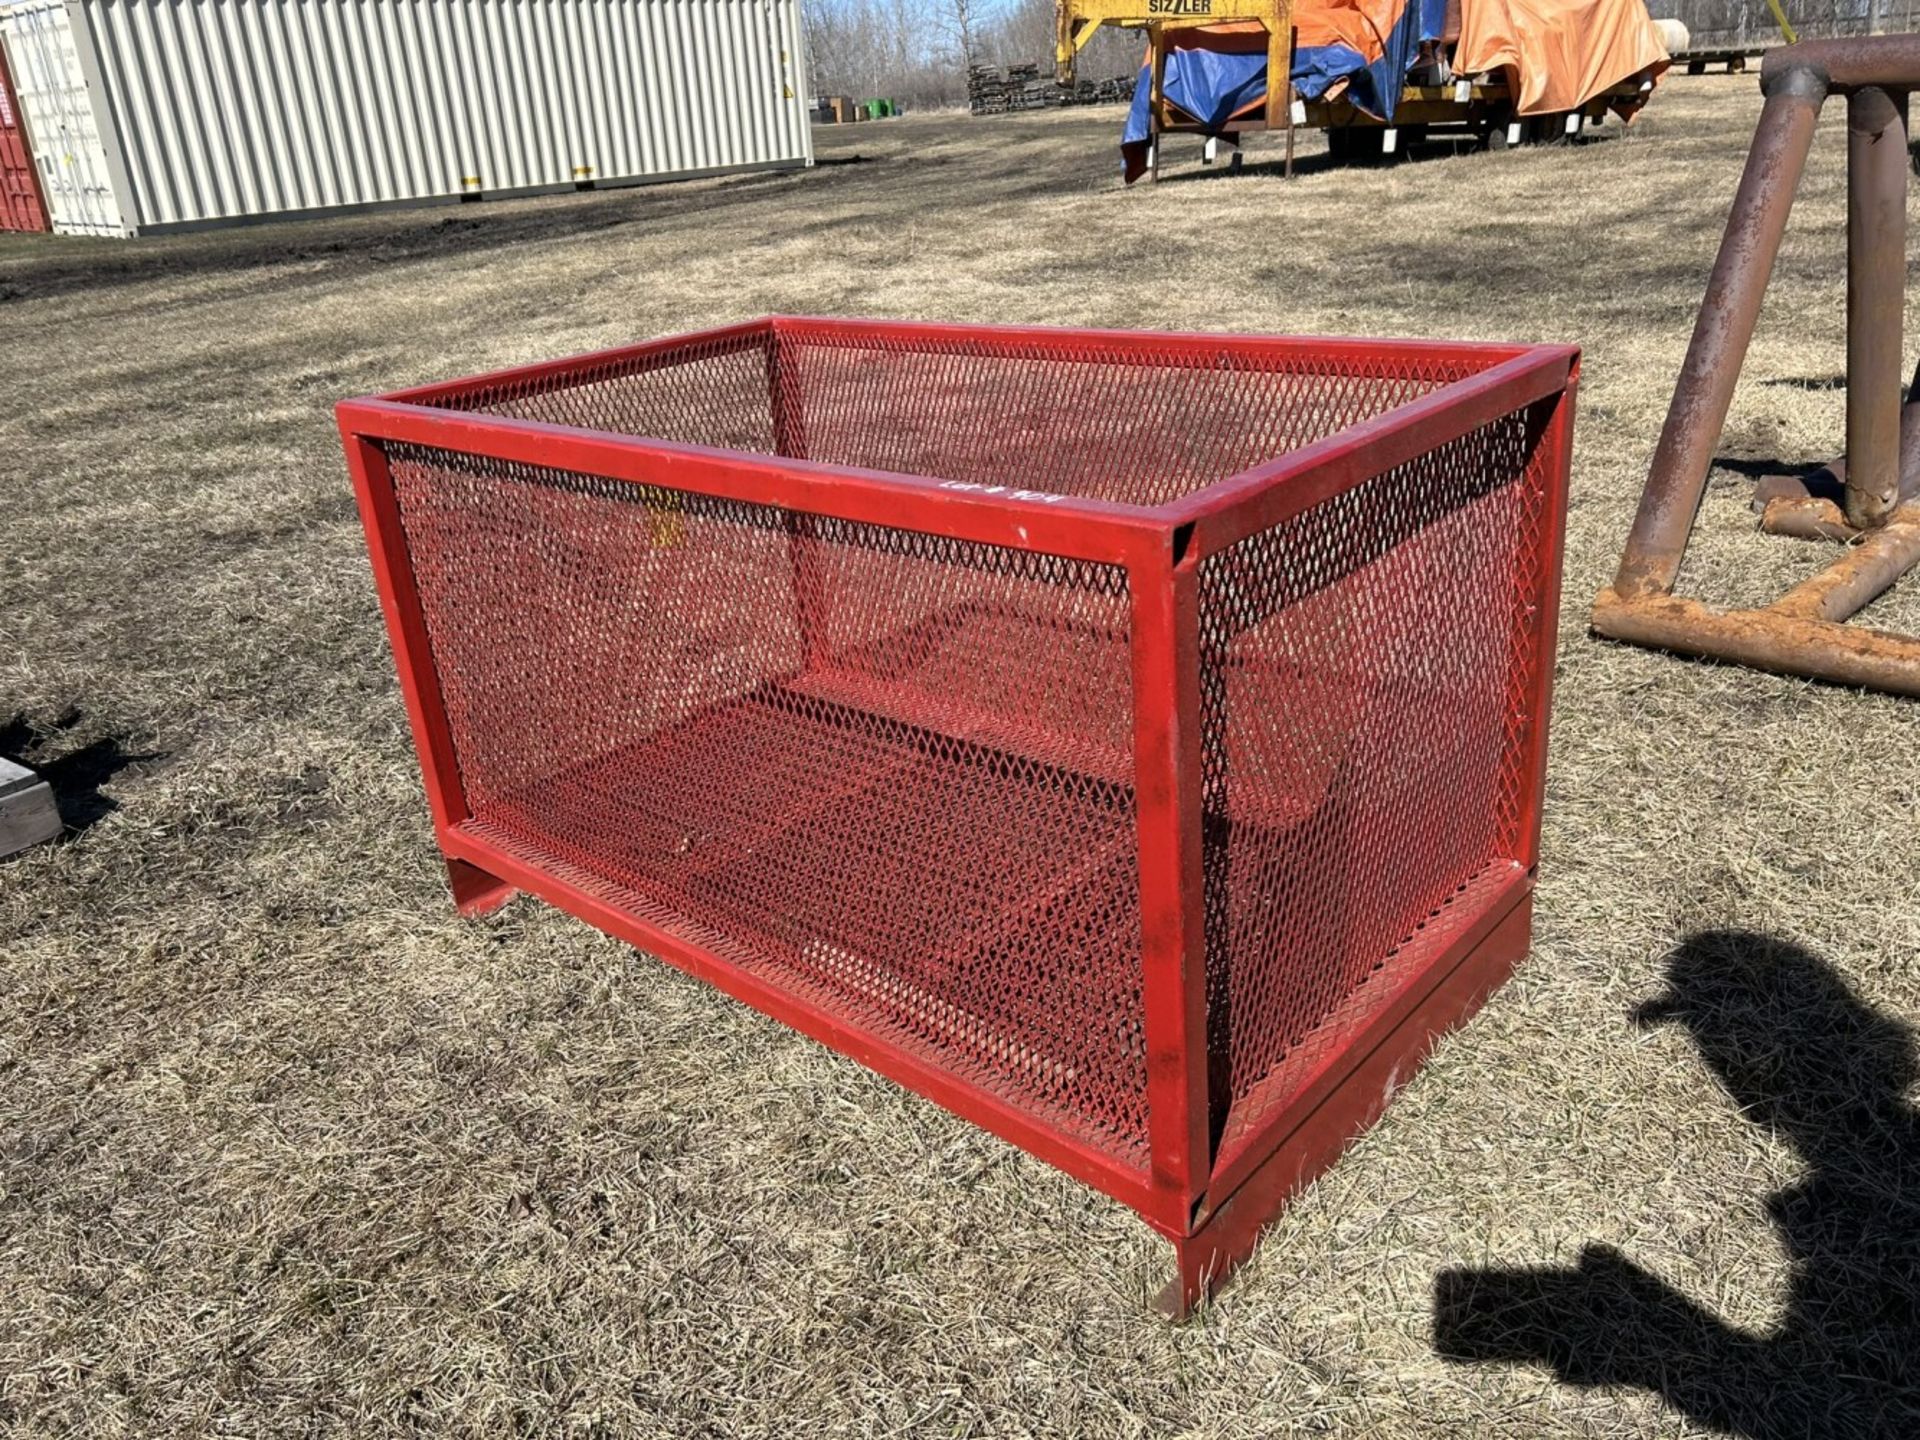 24"x48" RED STEEL MESH CRATE - Image 2 of 3